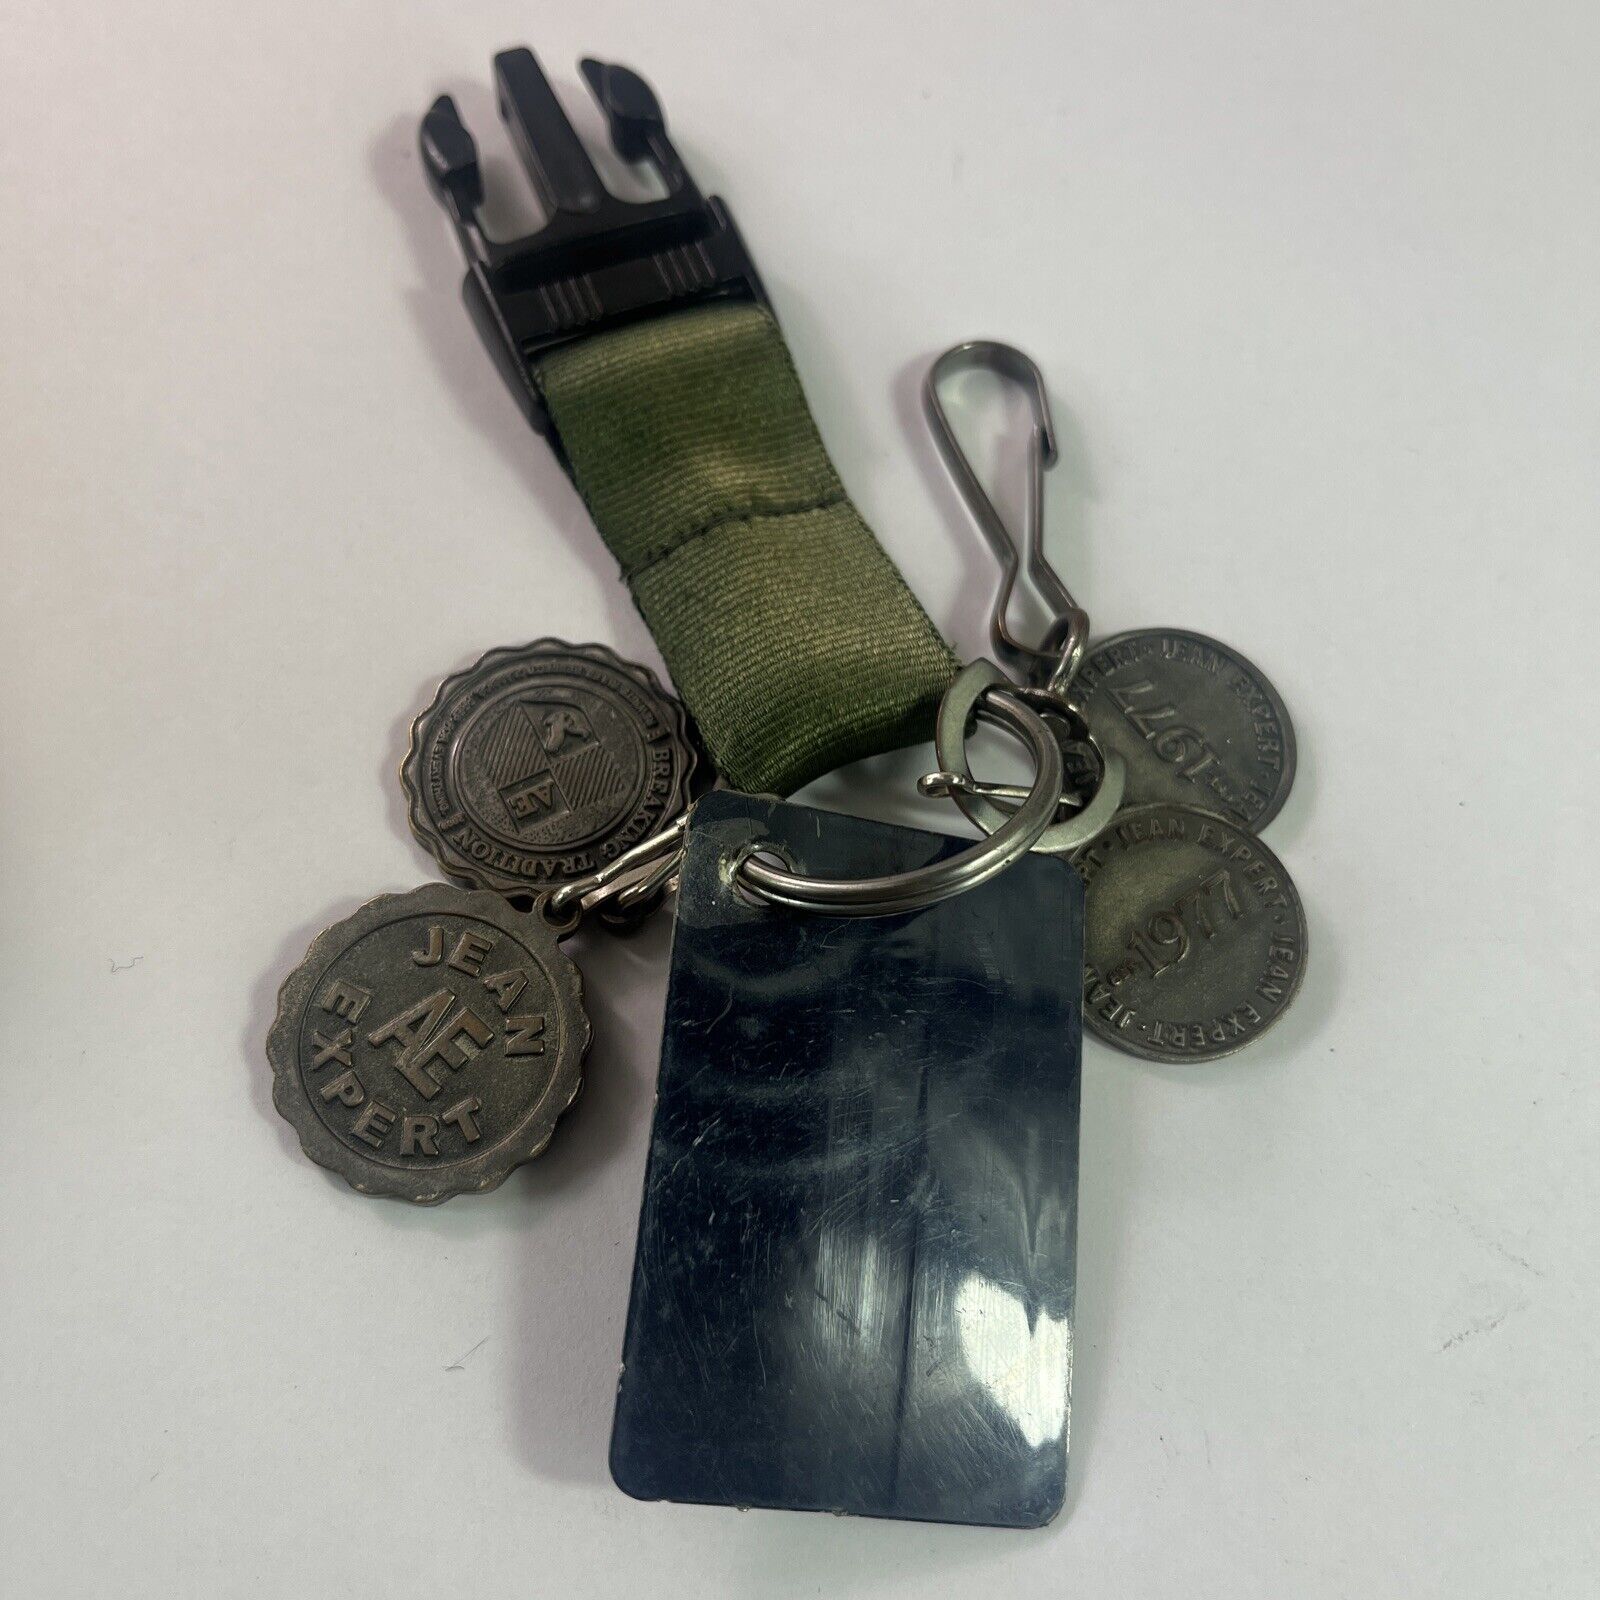 Vintage American Eagle Outfitters Keychain Coins Employee Given